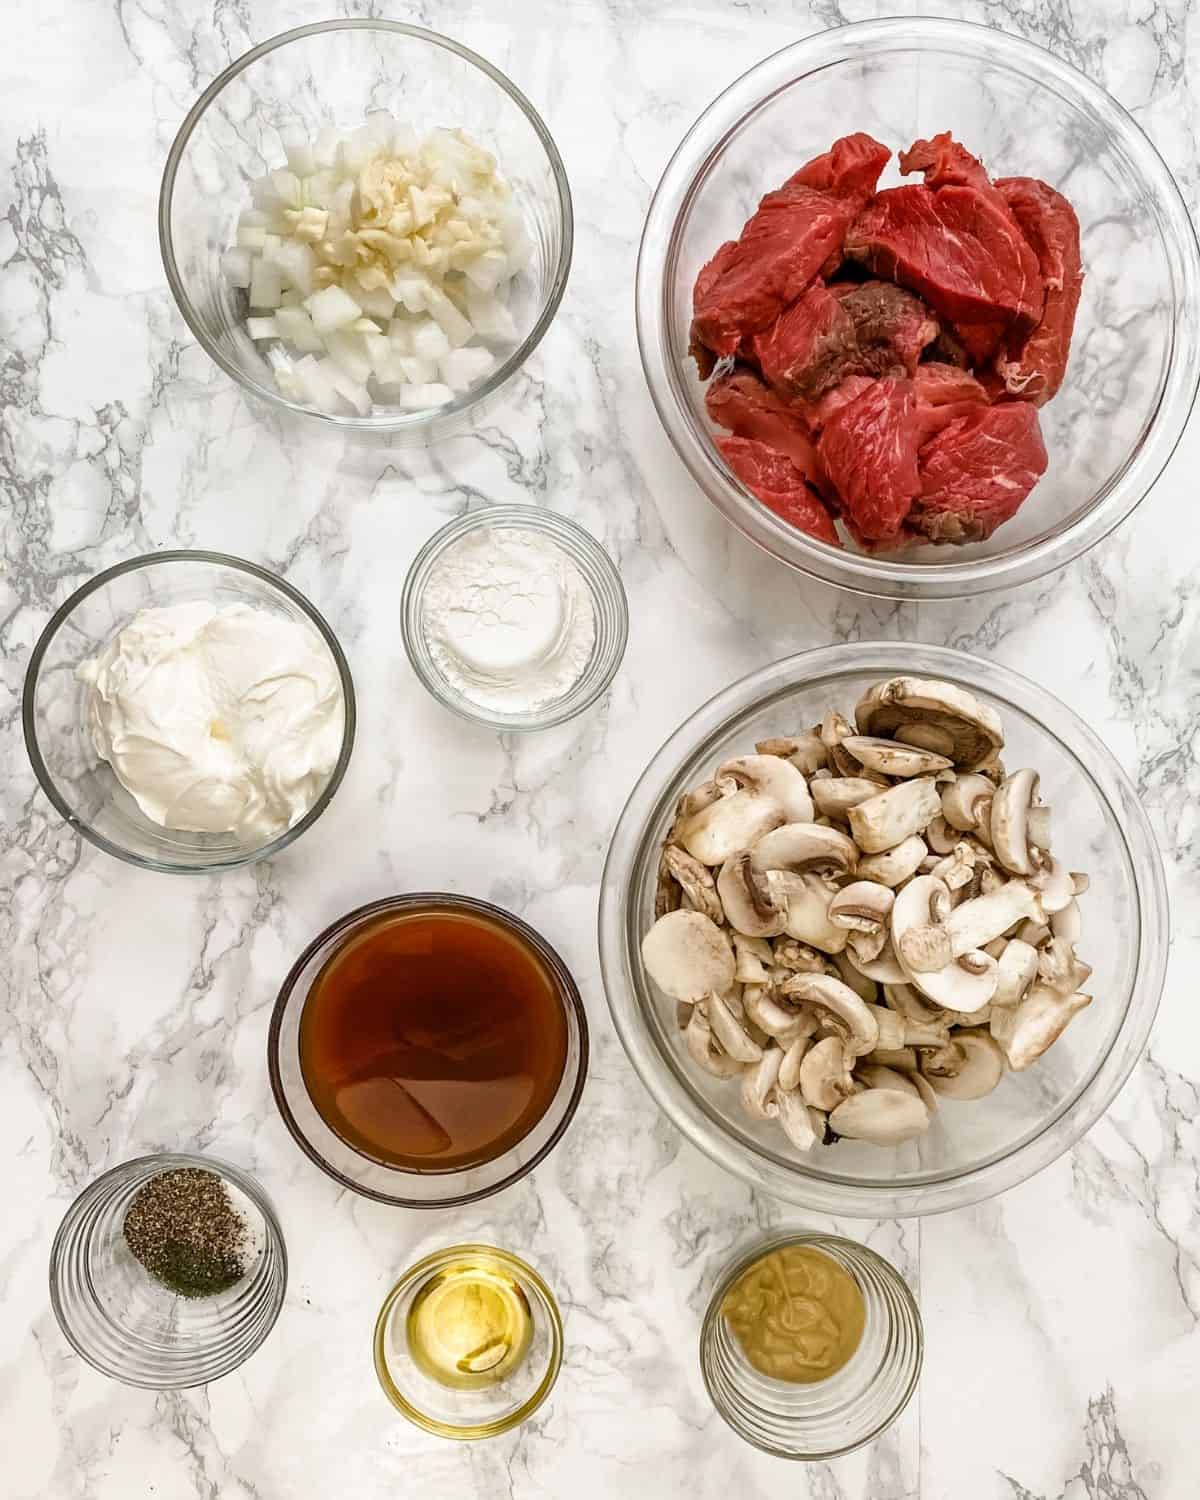 Ingredients for beef salad in a crock pot.